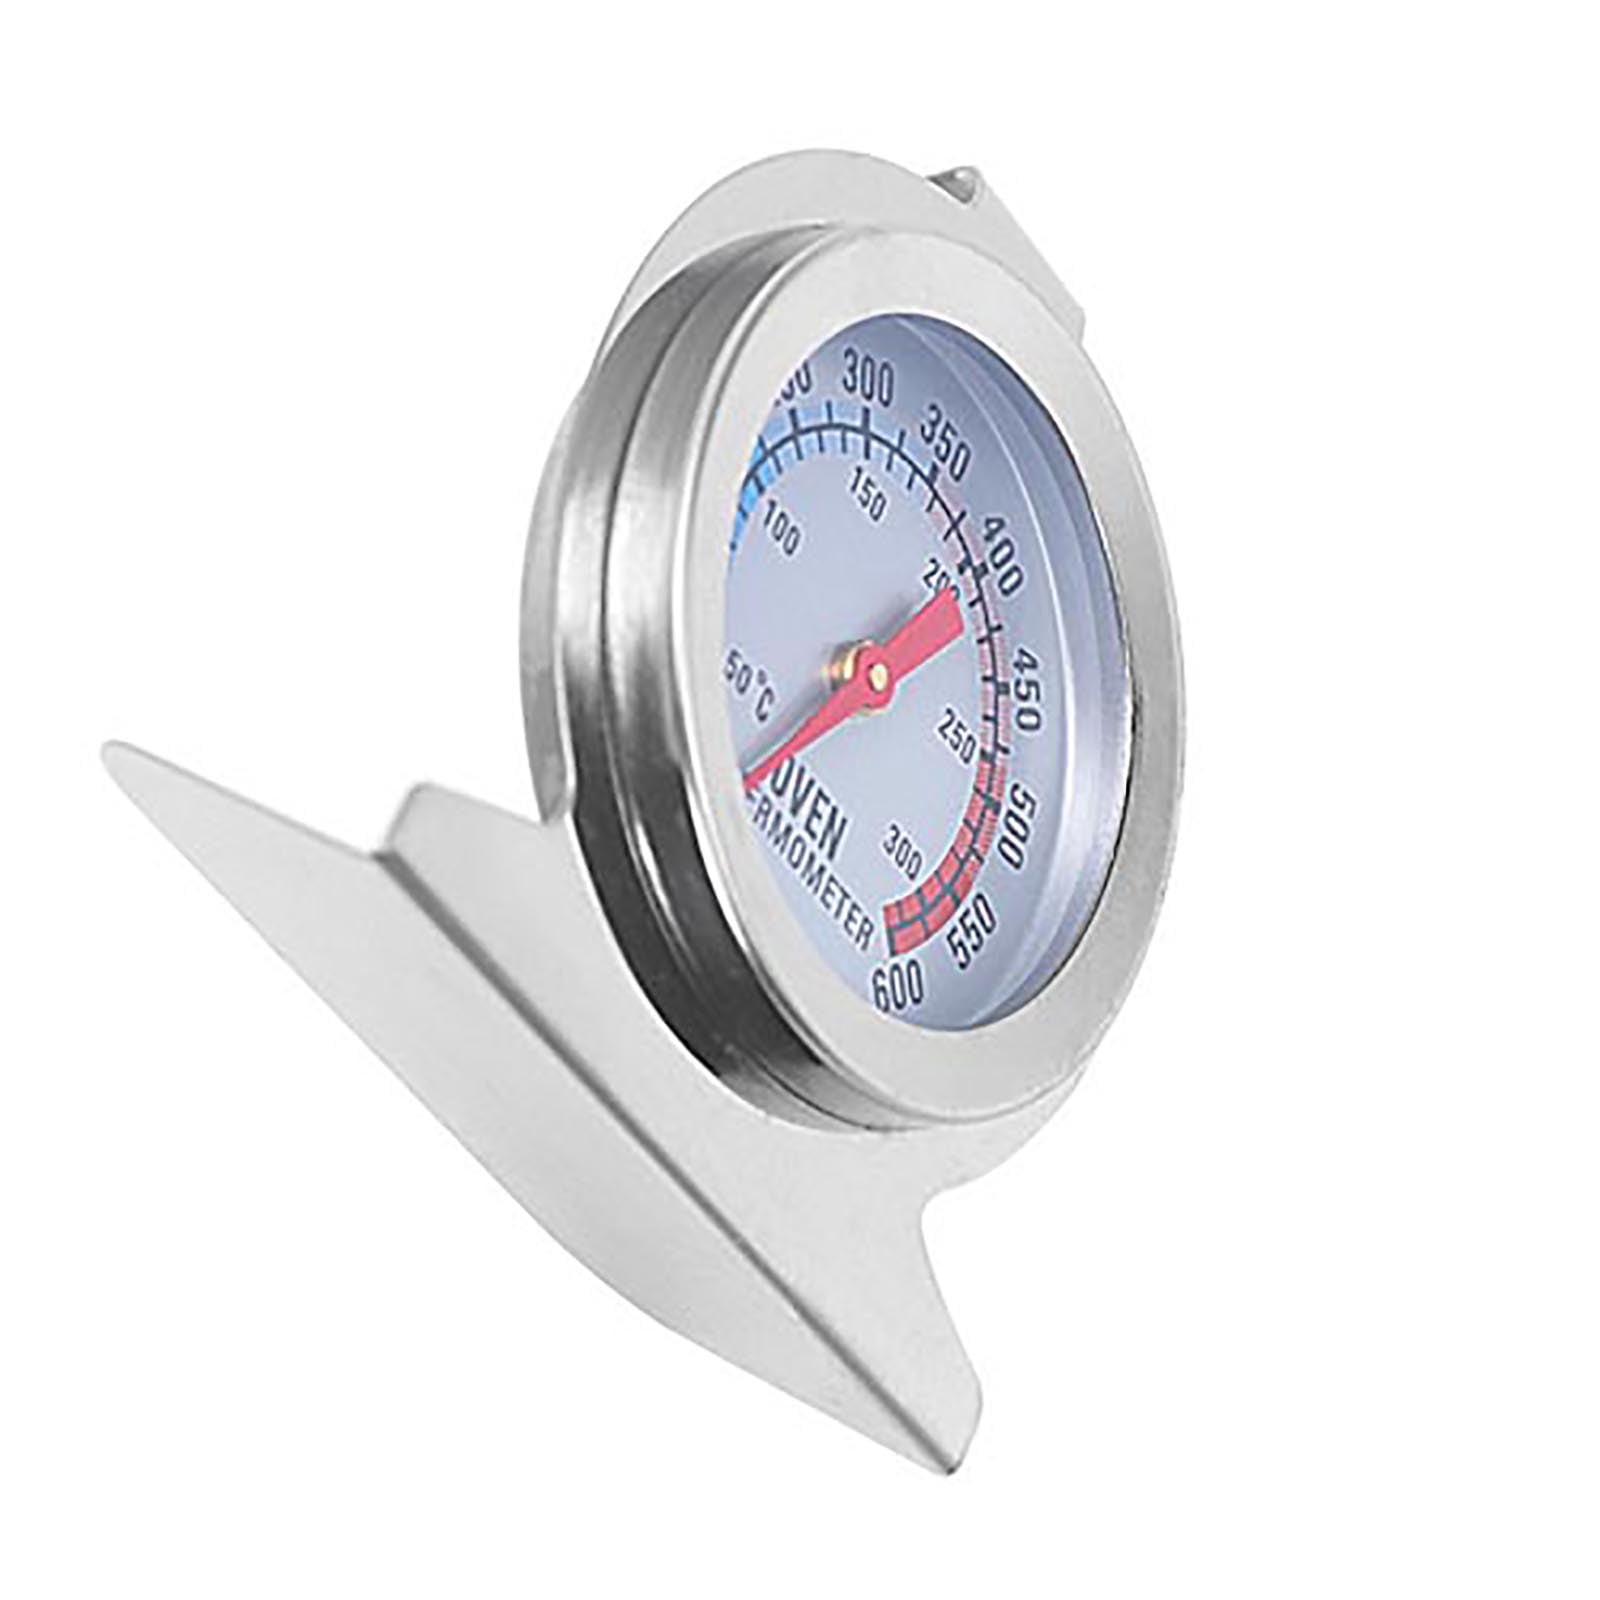 1pc Oven Thermometers, Baking High-temperature Resistant Metal Oven  Thermometer, Baking Oven Base Type Oven Pointer Thermometer, Mini Dial  Stand Up Temperature Gauge, 50-300 °C Oven Thermometers, Kitchen Gadgets,  Cheap Items